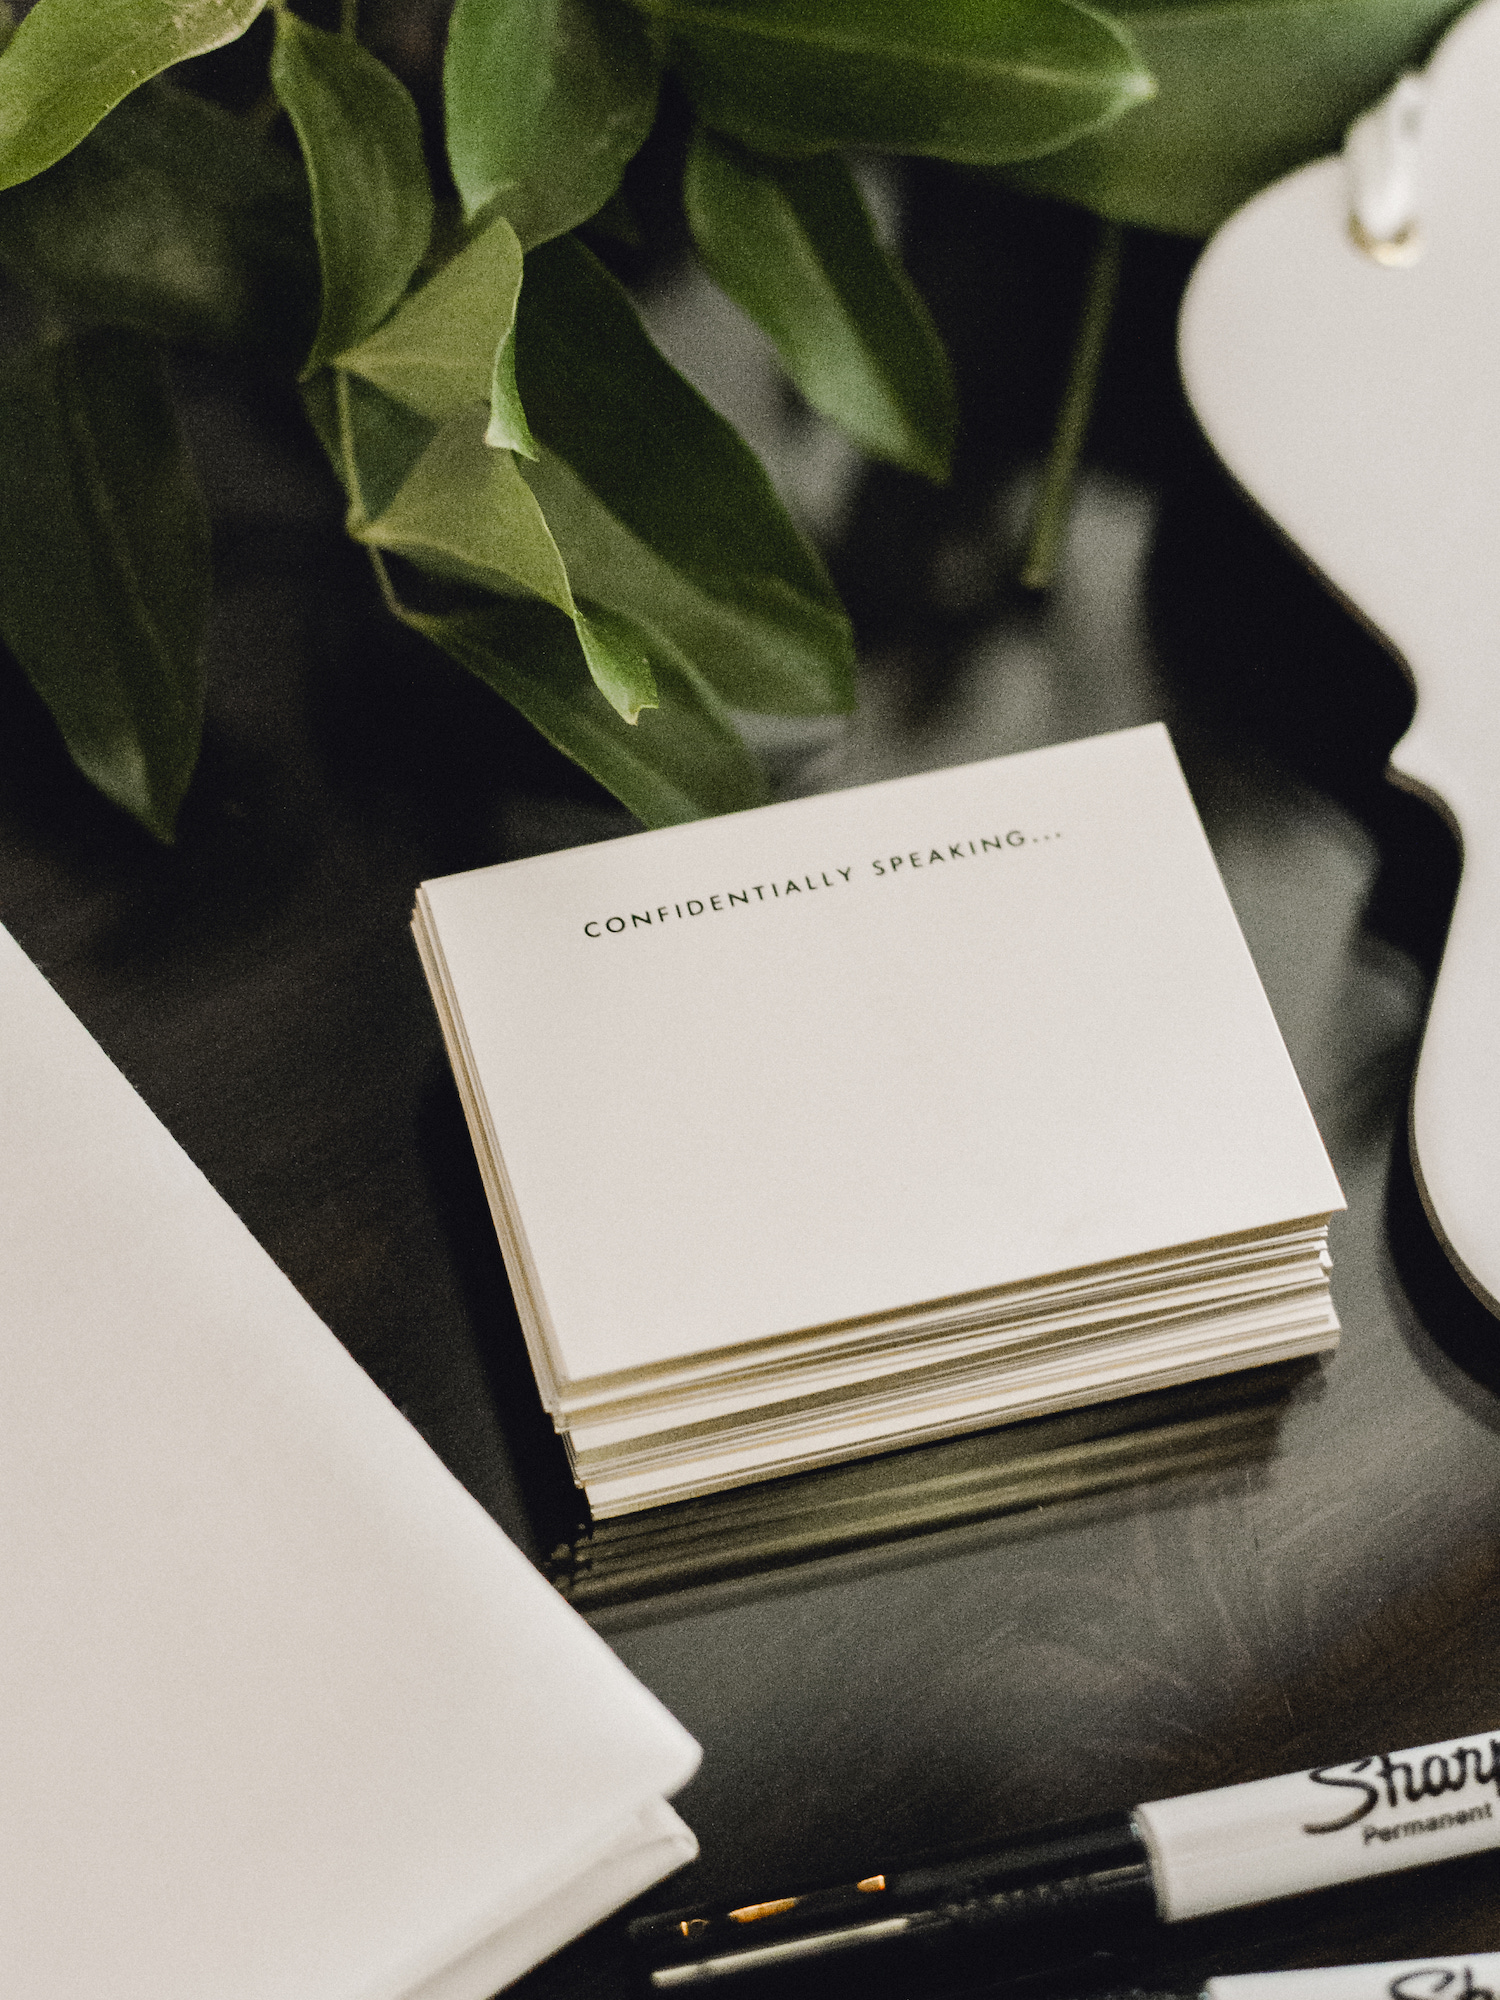 Kate Spade "confidentially speaking" guest book cards